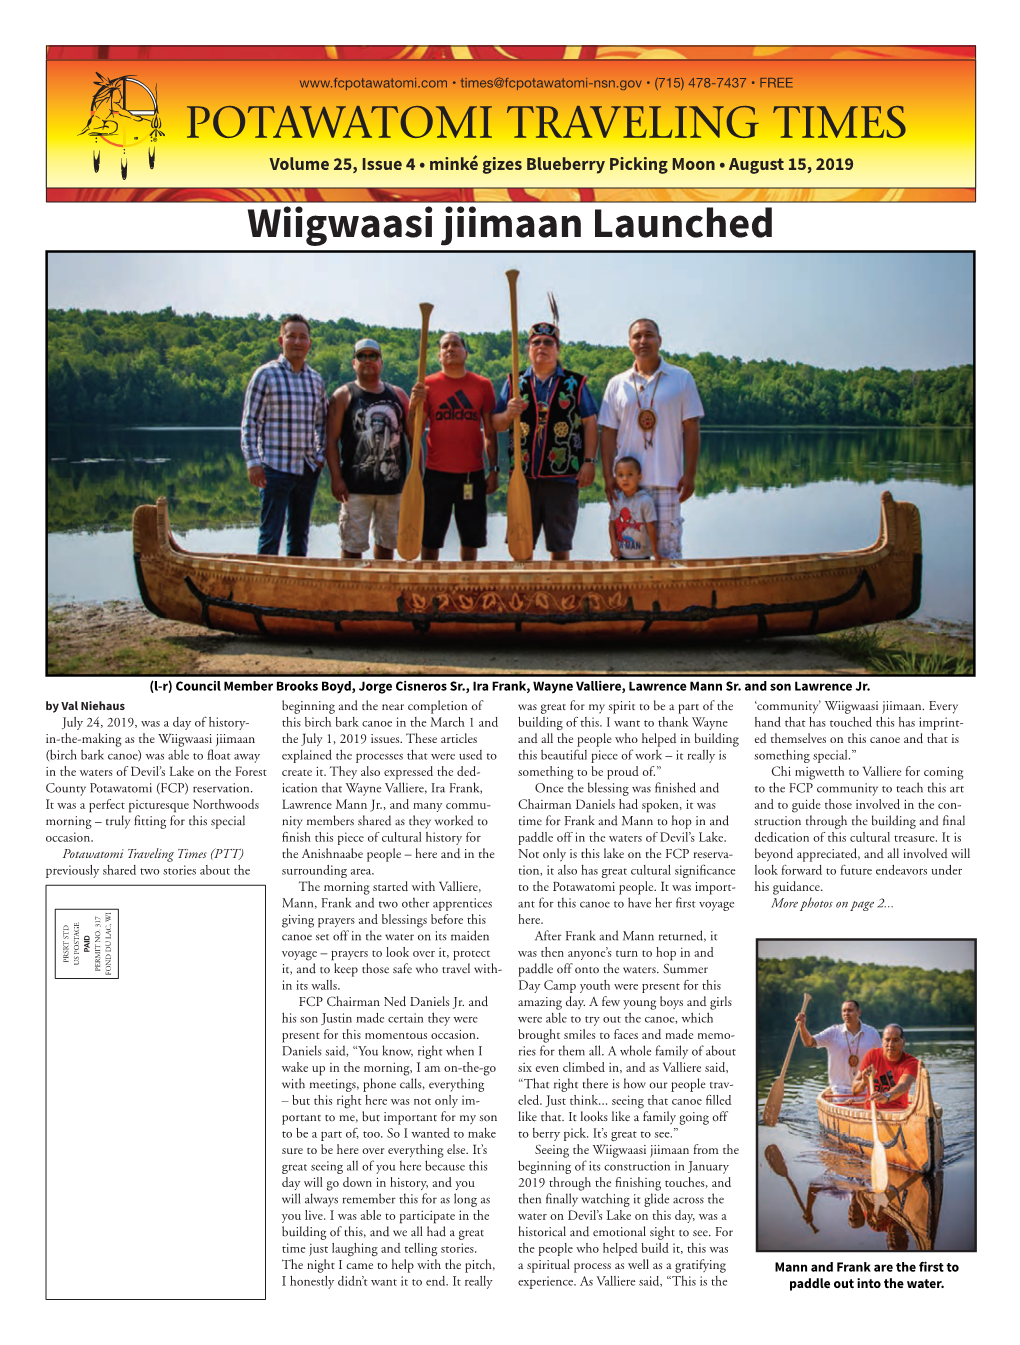 POTAWATOMI TRAVELING TIMES Volume 25, Issue 4 • Minké Gizes Blueberry Picking Moon • August 15, 2019 Wiigwaasi Jiimaan Launched